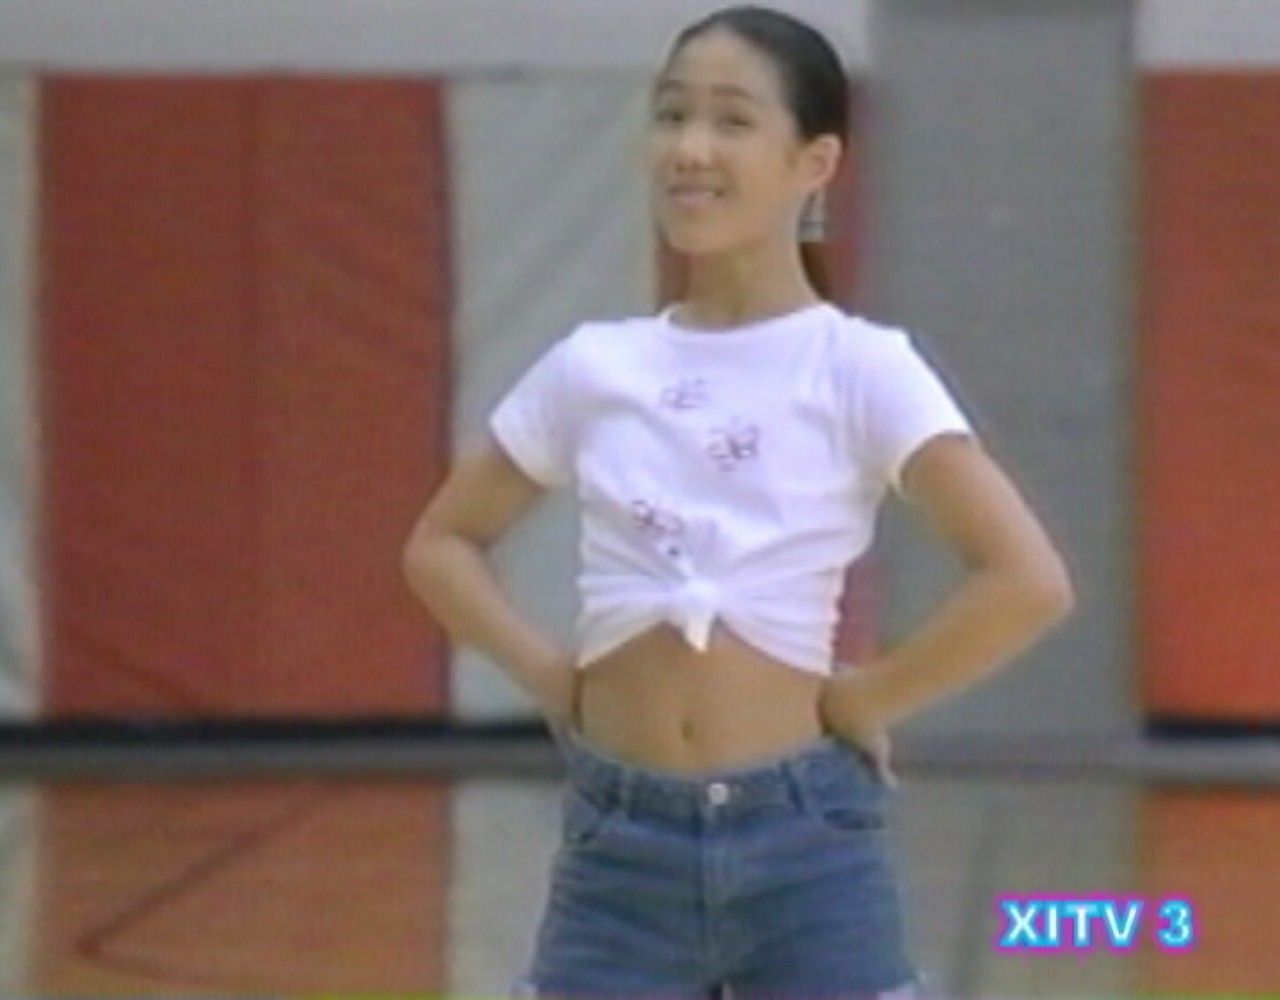 XITV CHANNEL 3 Nation of XI's Cheer Dance Team Videos!